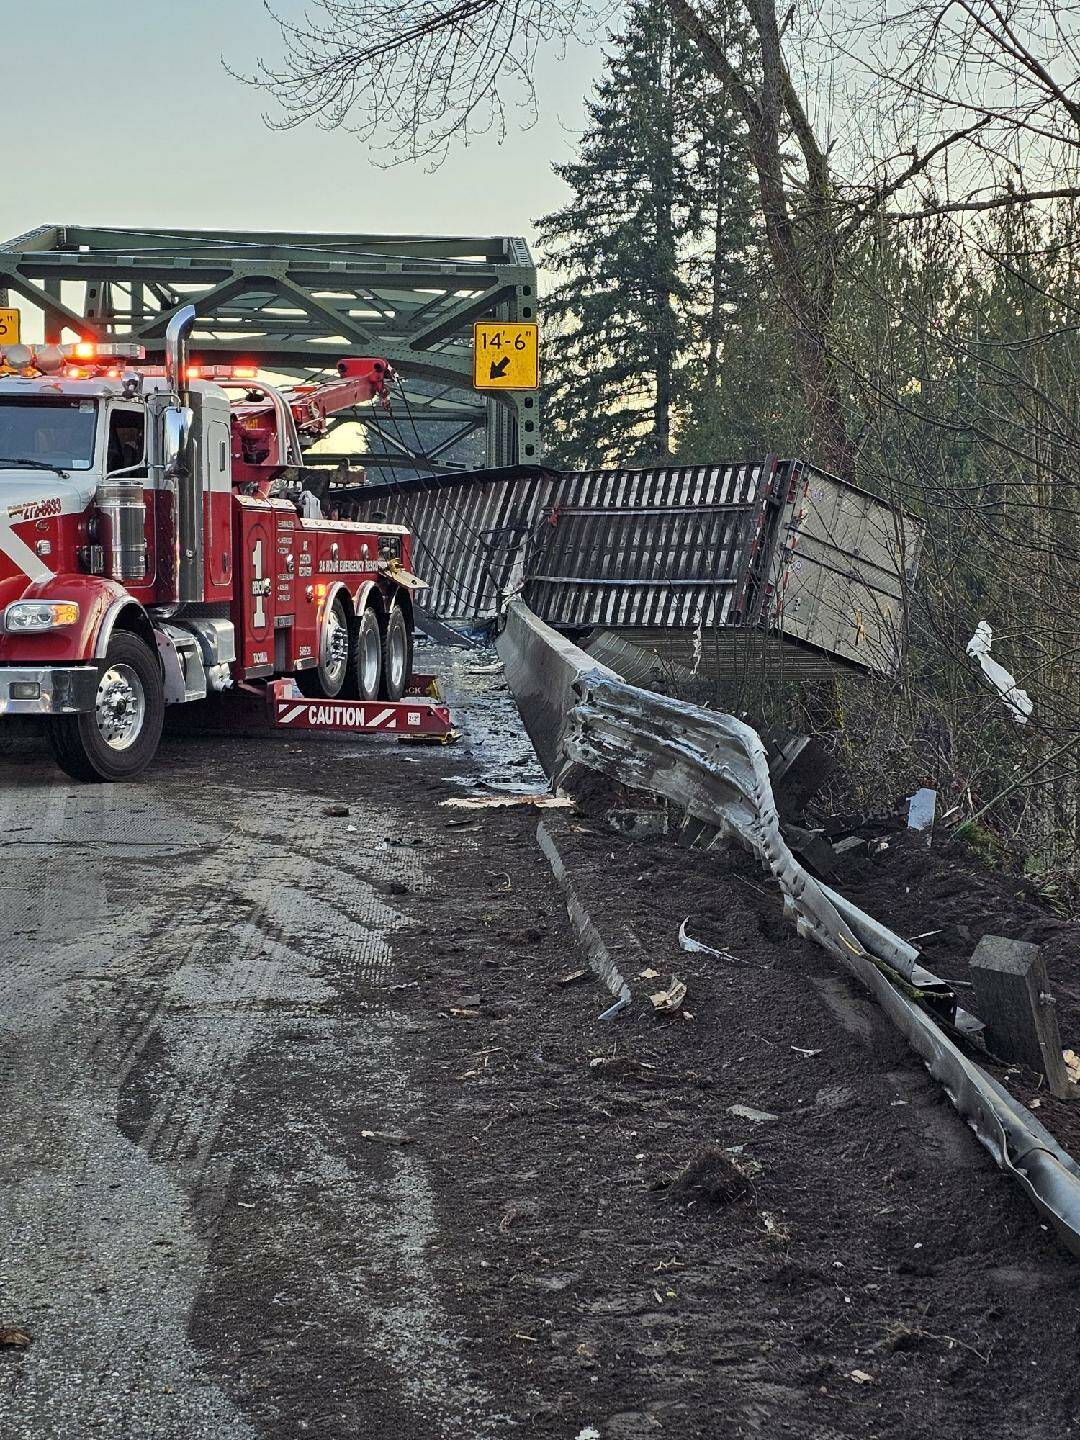 The scene of the semi-truck collision posted at 11:17 a.m. Tuesday, March 19. (Courtesy of Washington State Department of Transportation.)